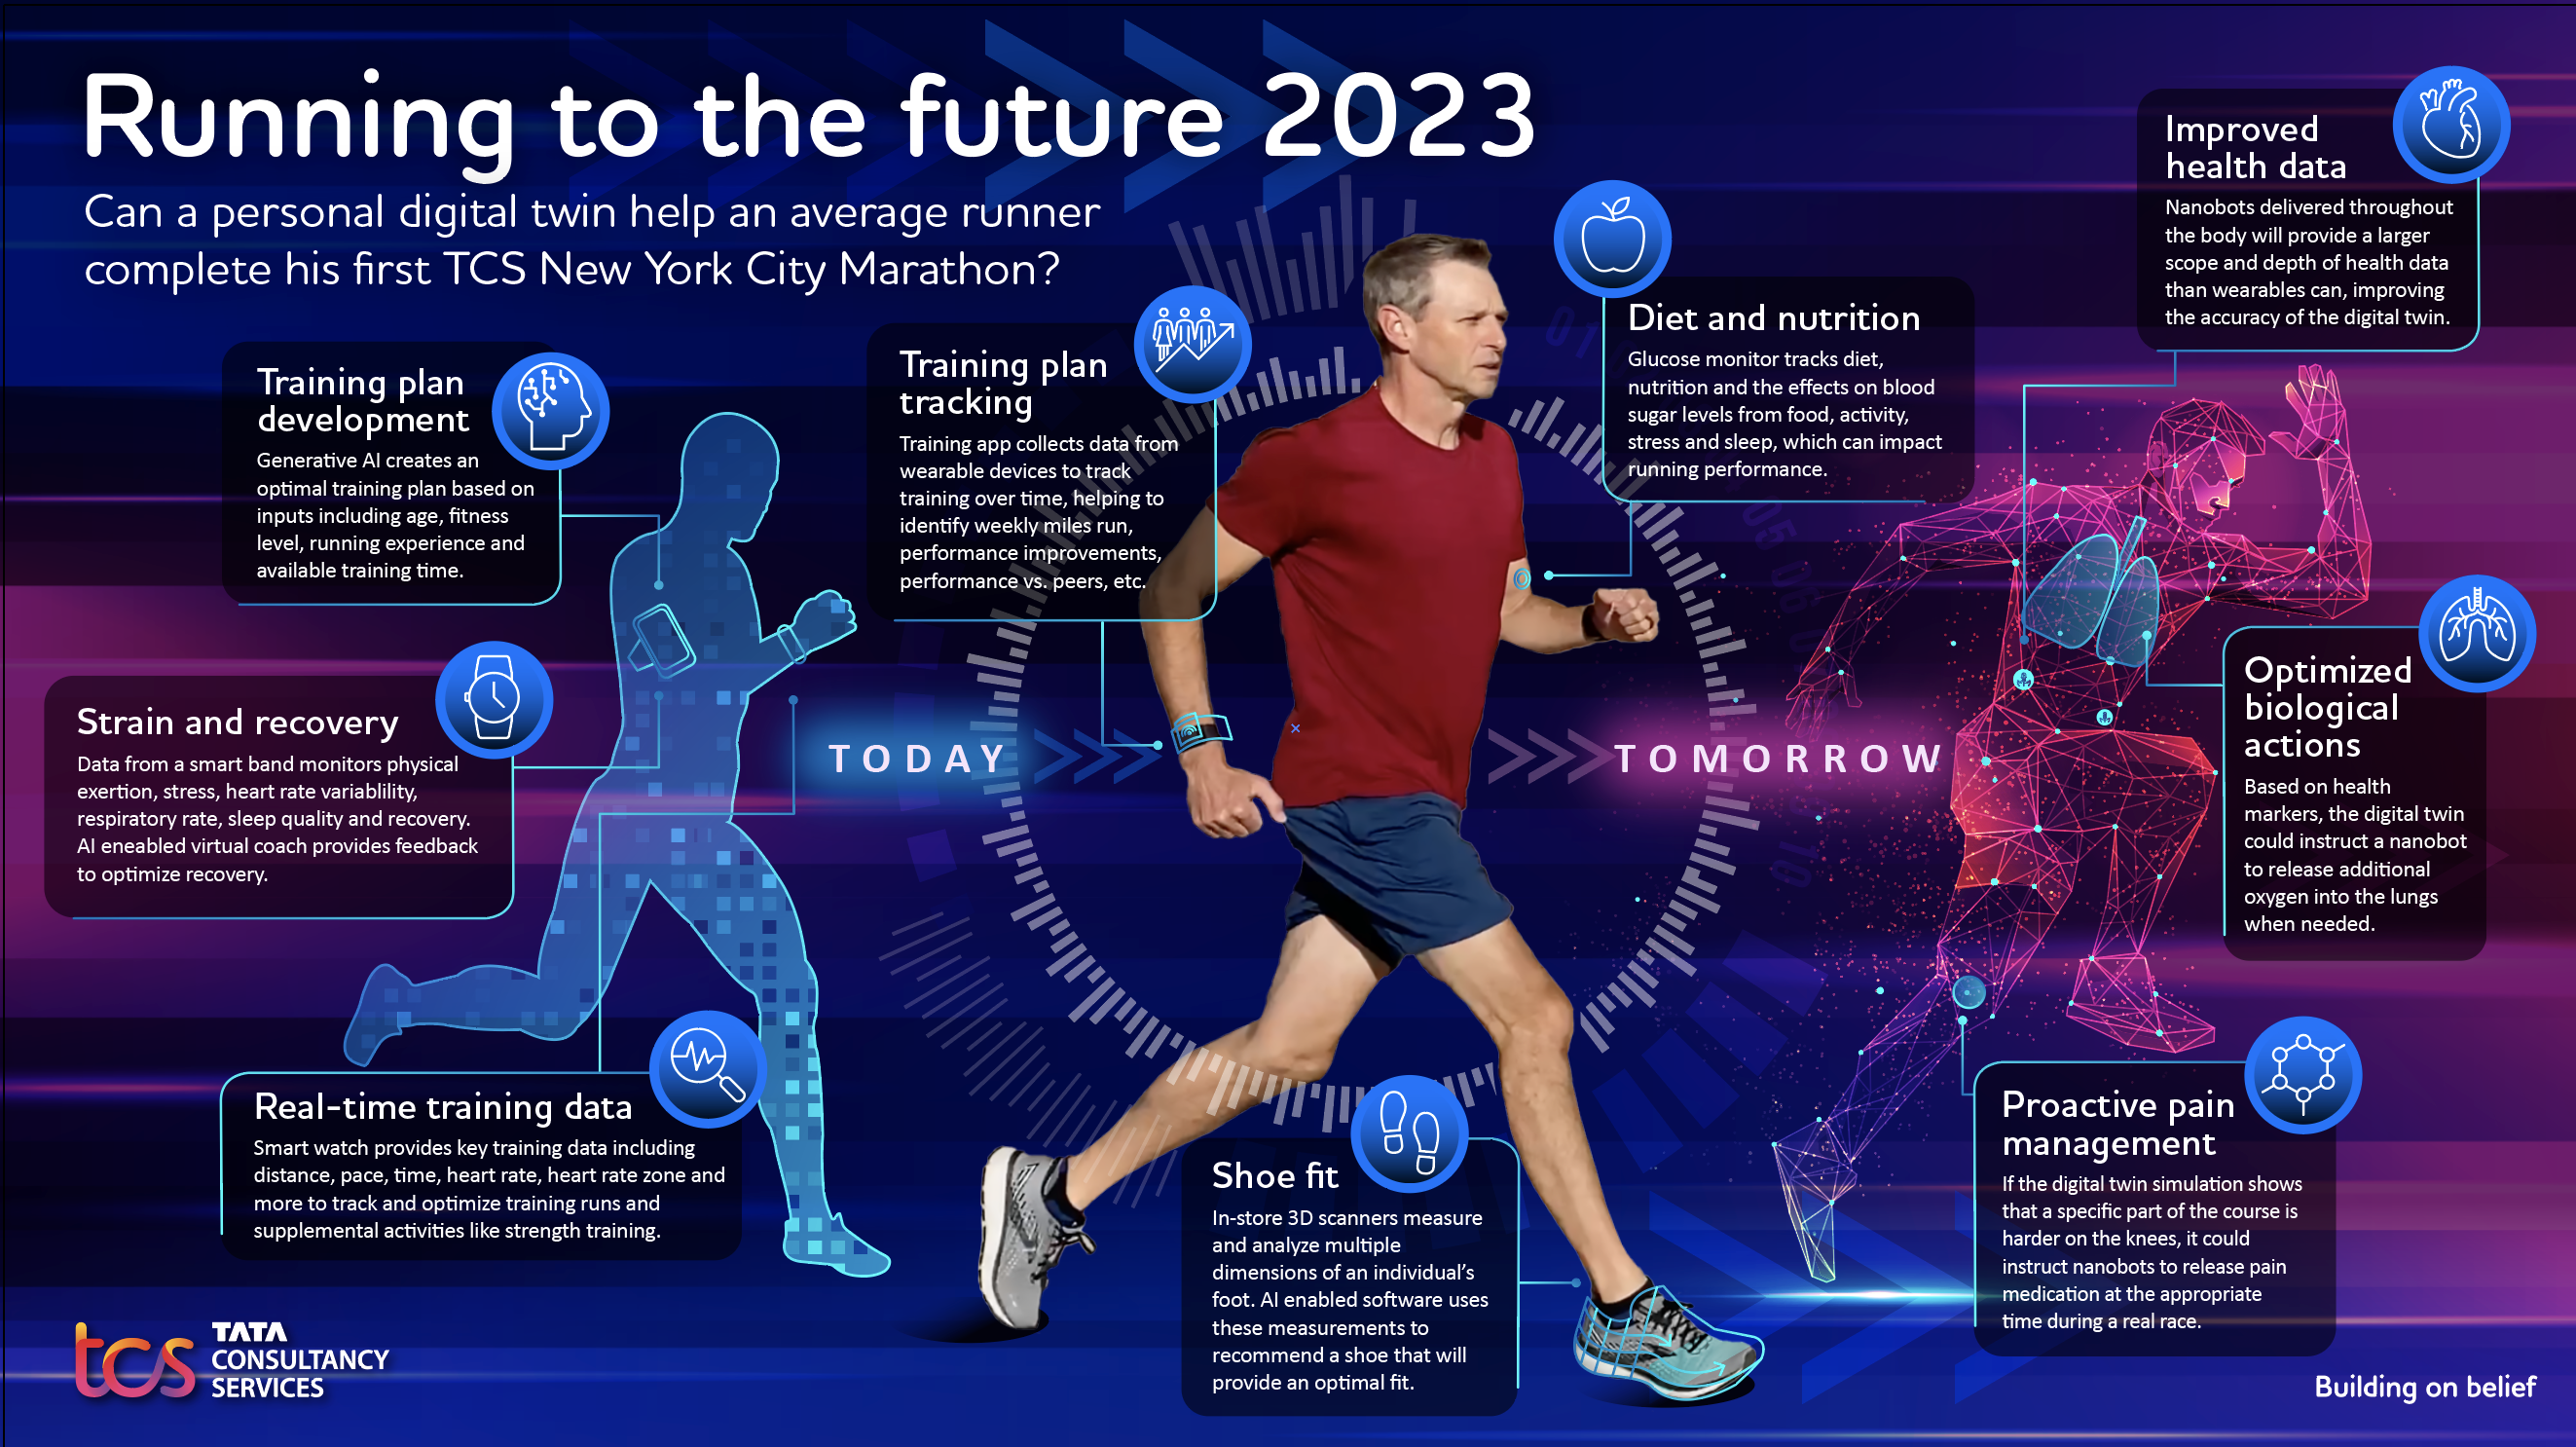 Running to the future with digital twin